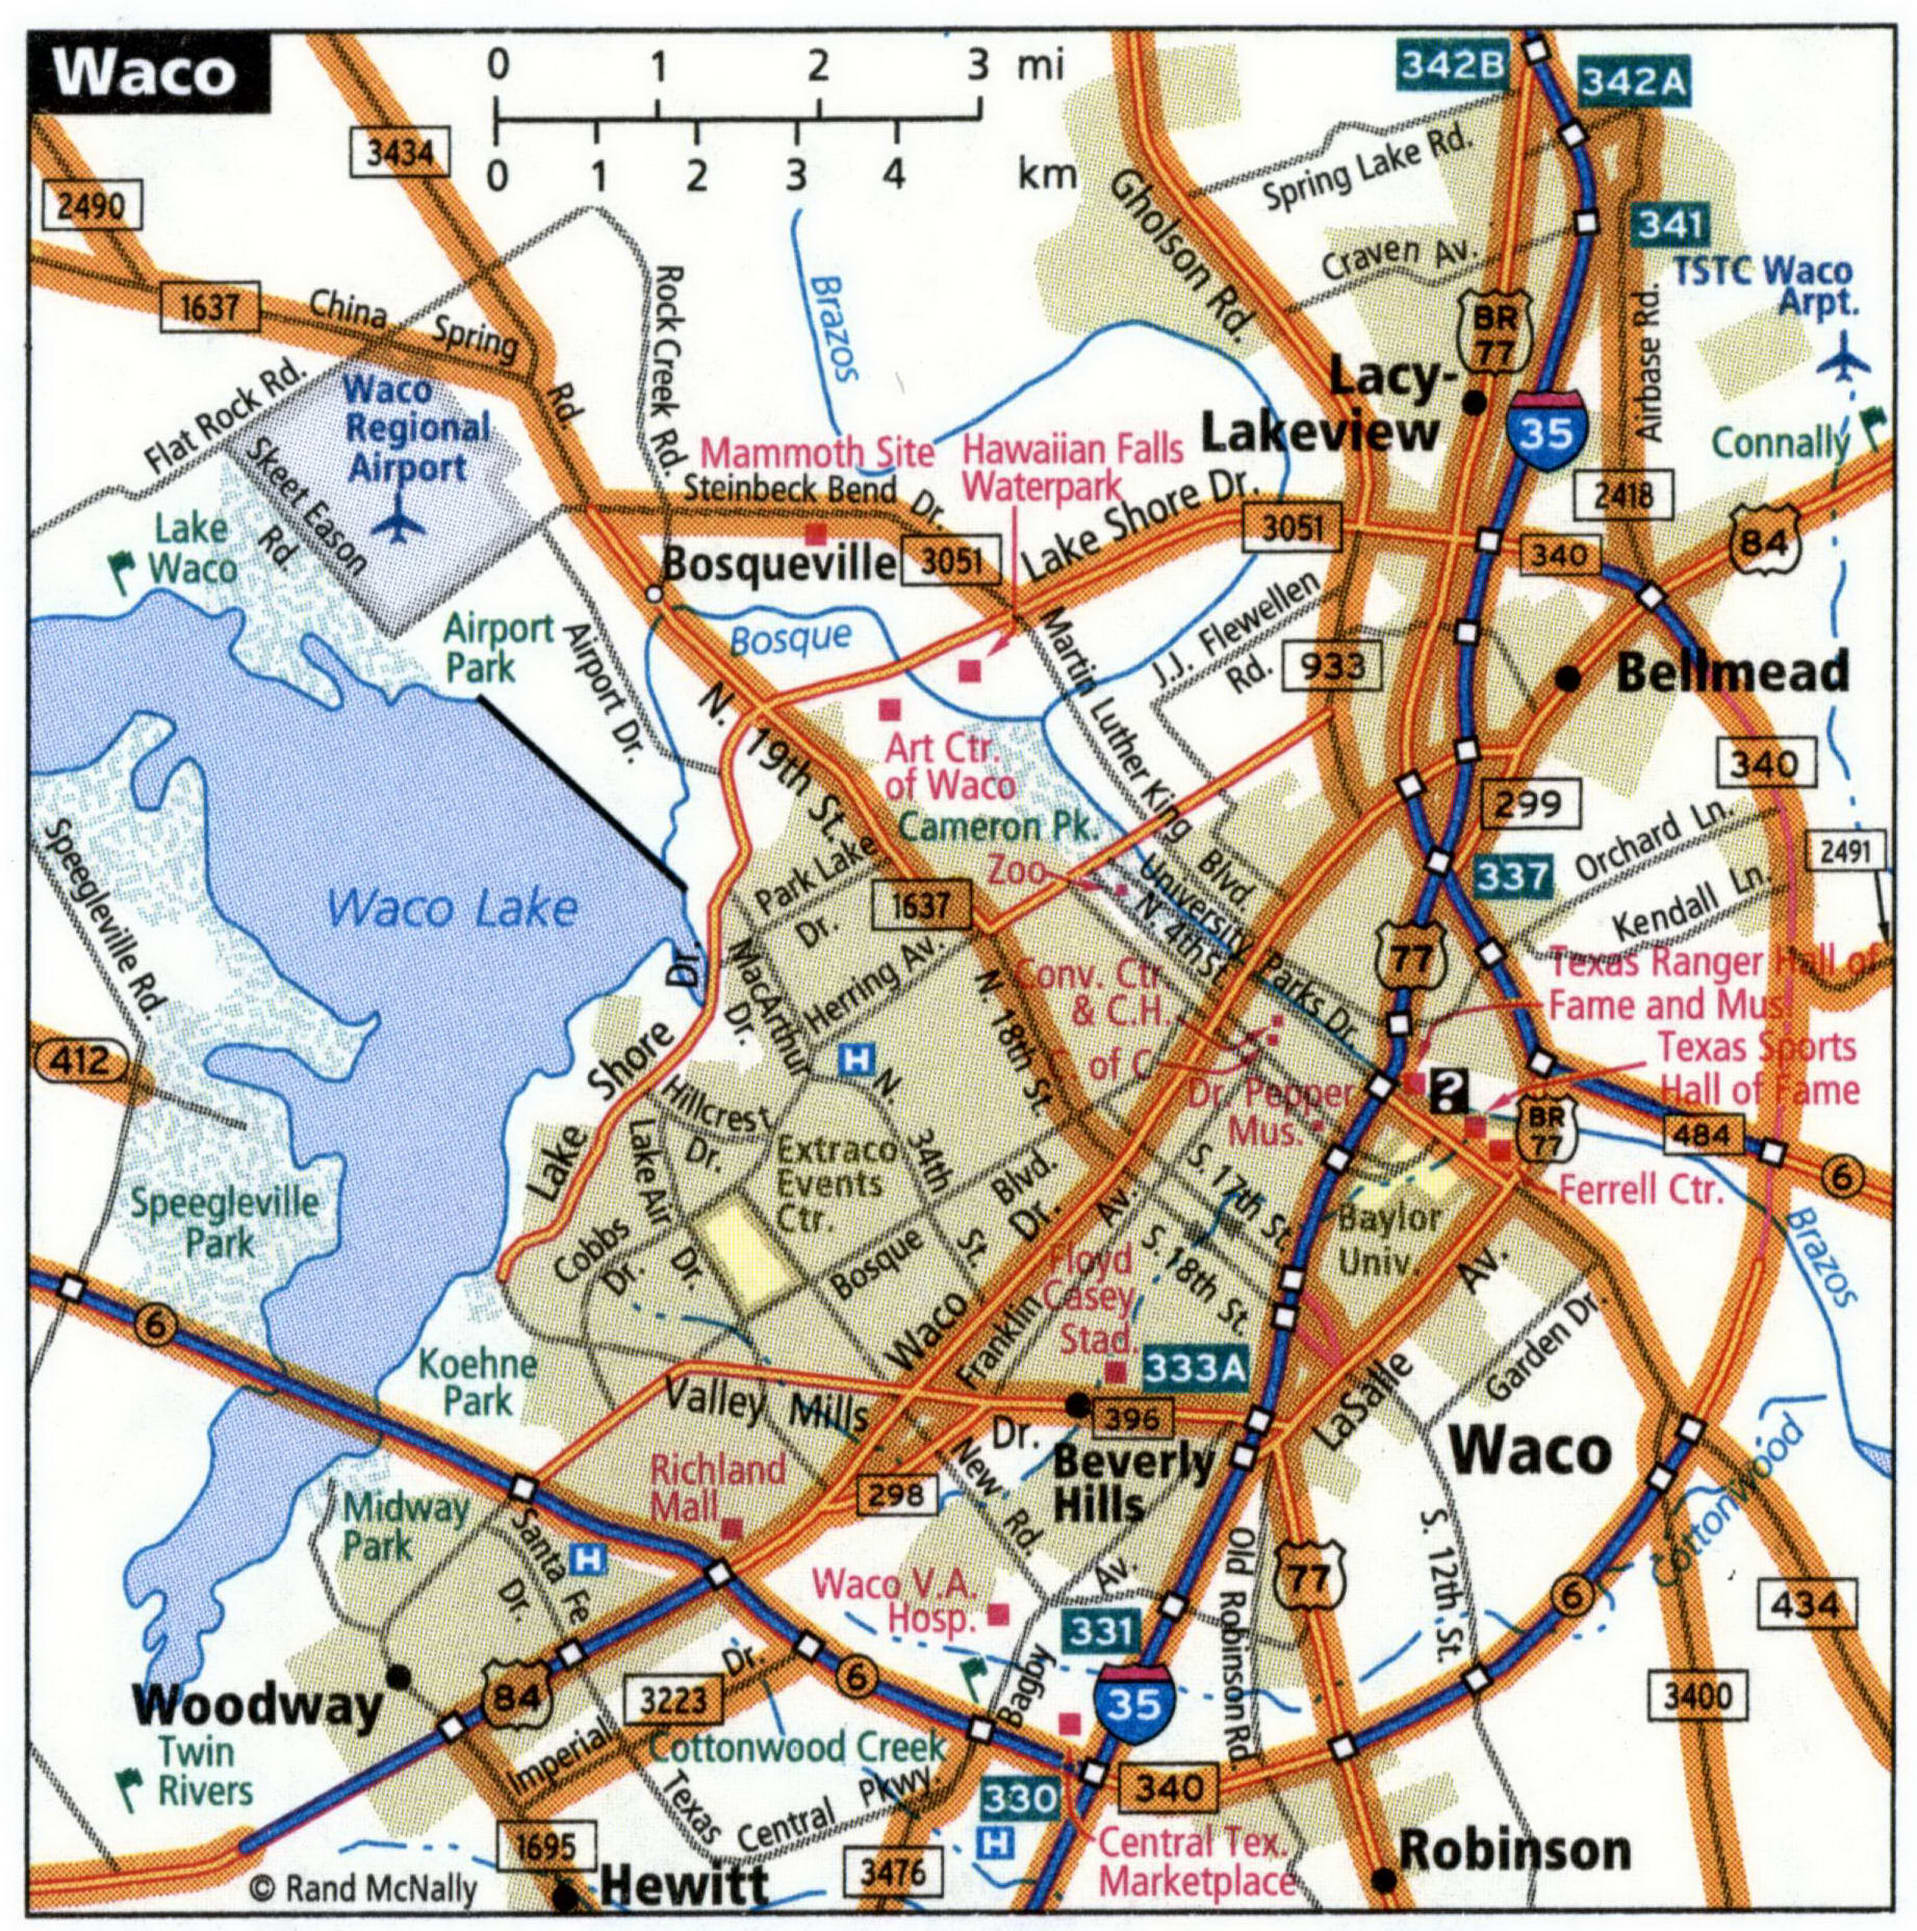 Waco city map for truckers